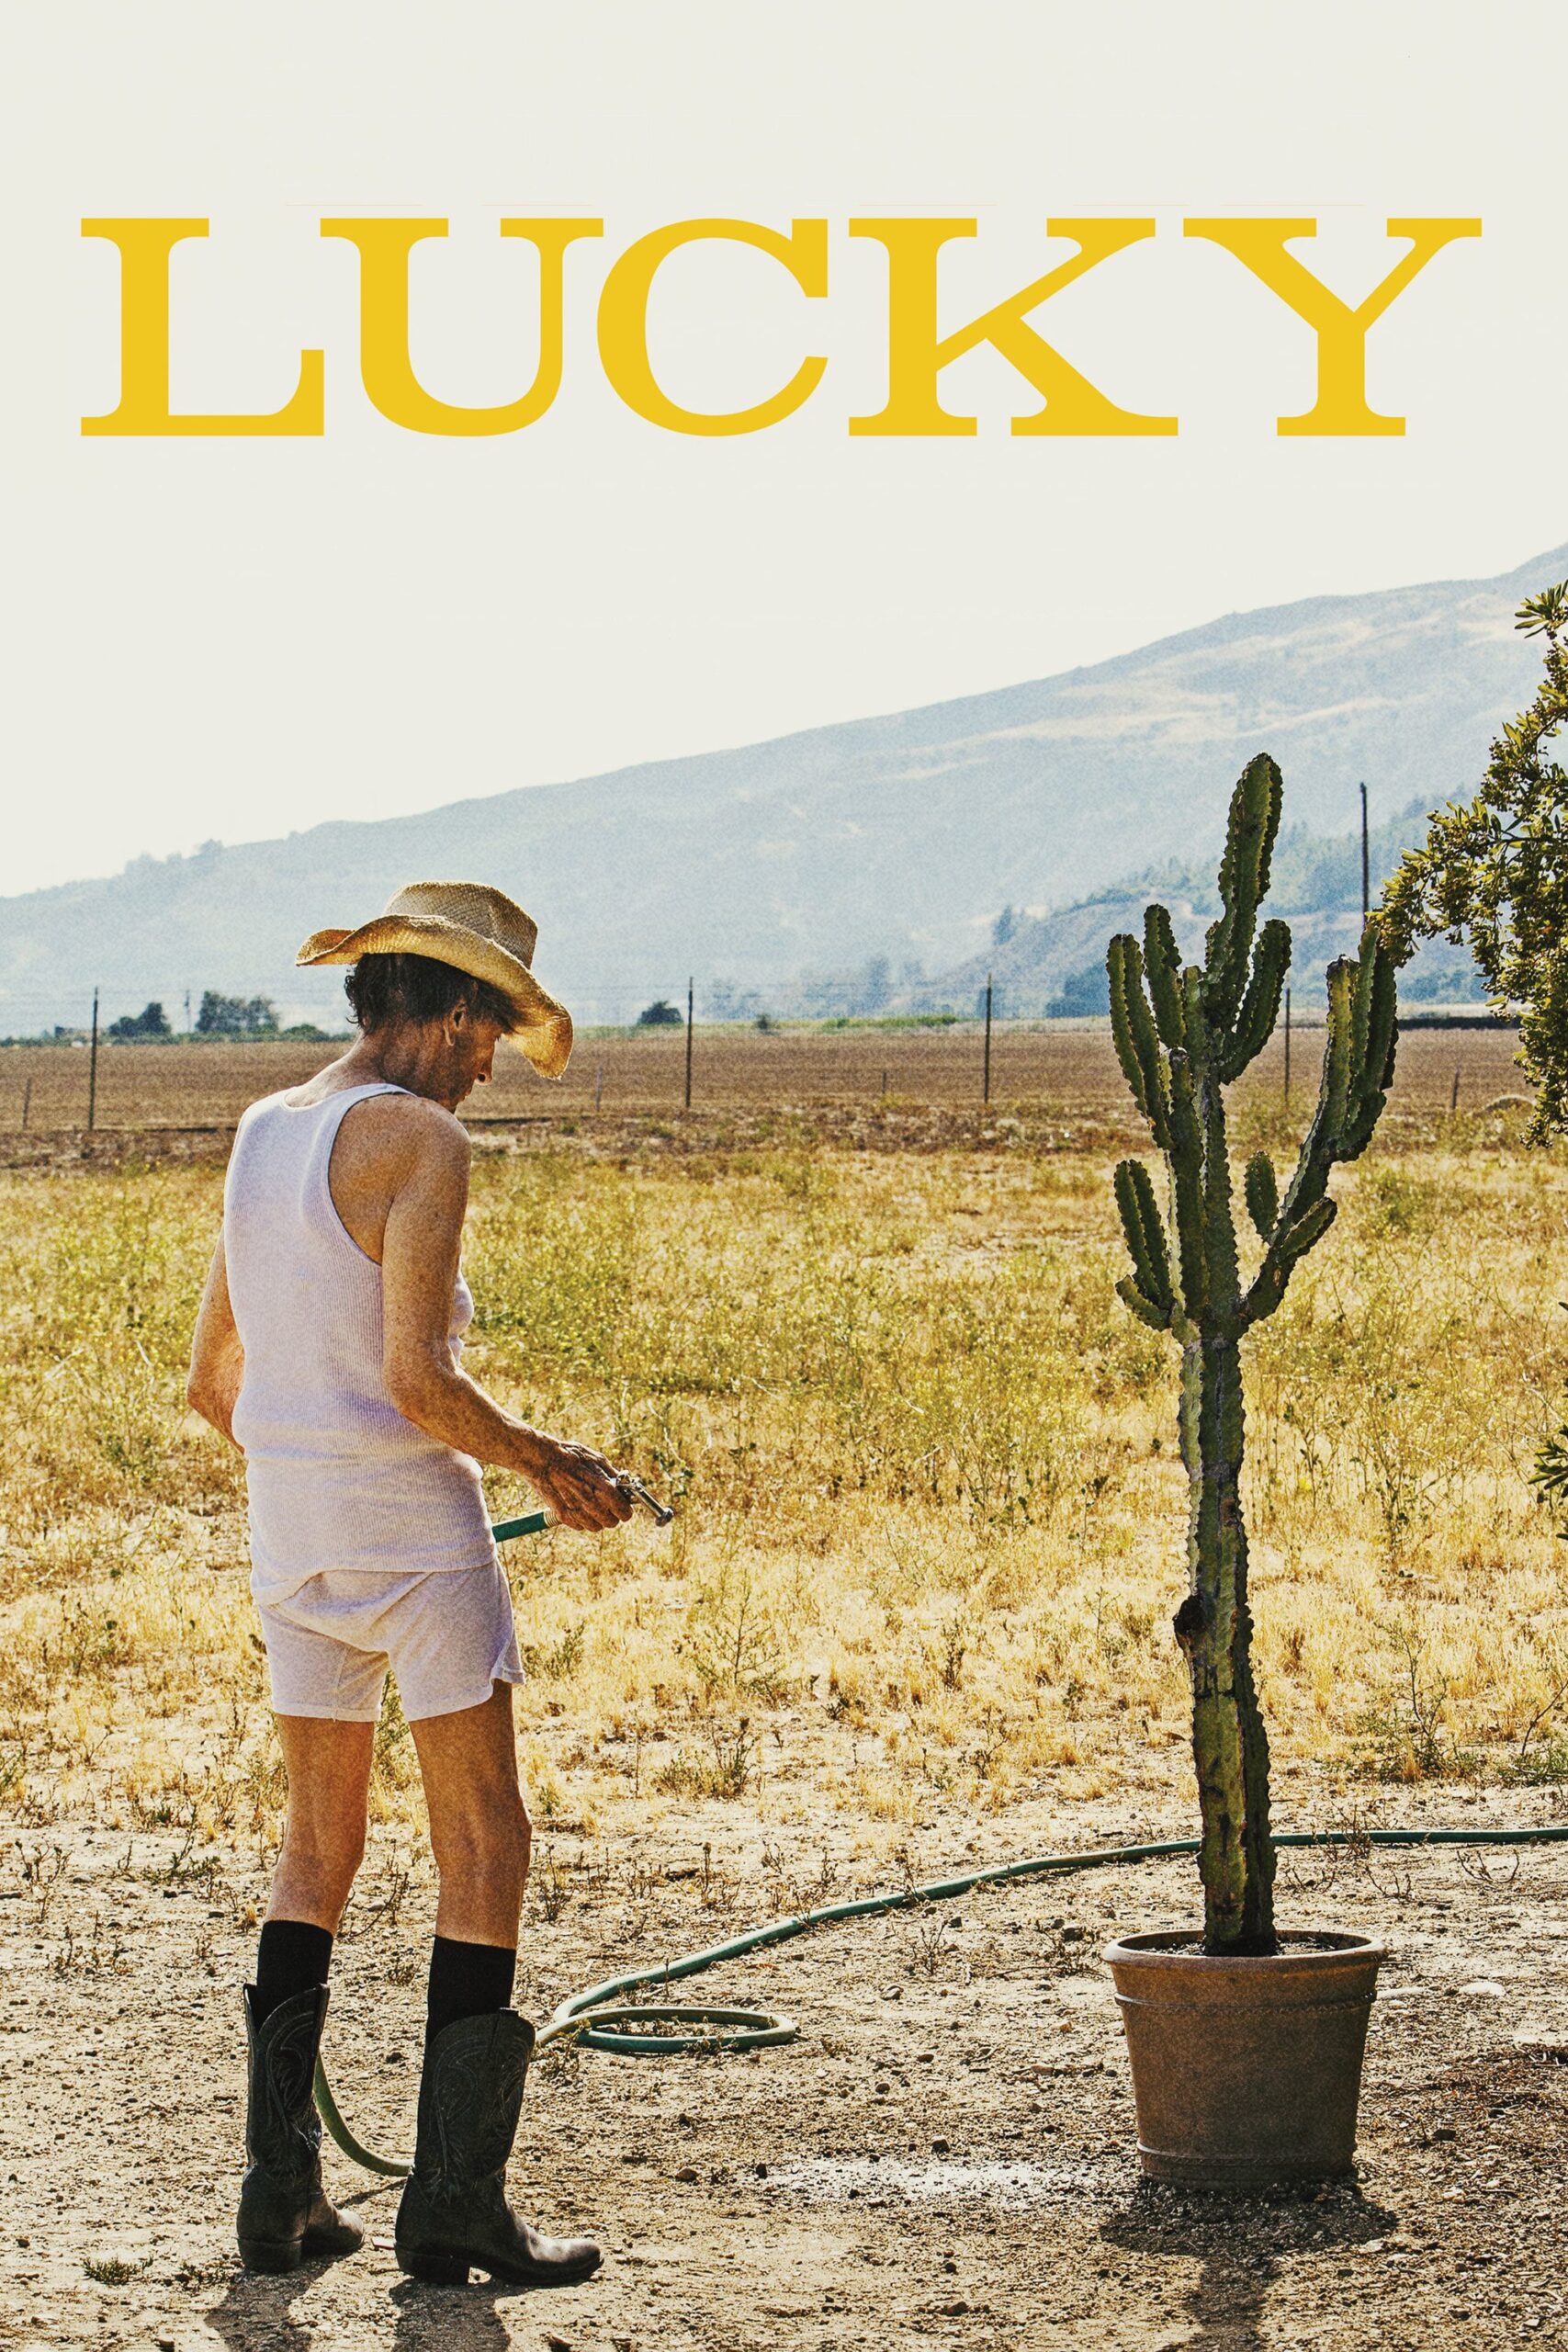 Poster for the movie "Lucky"